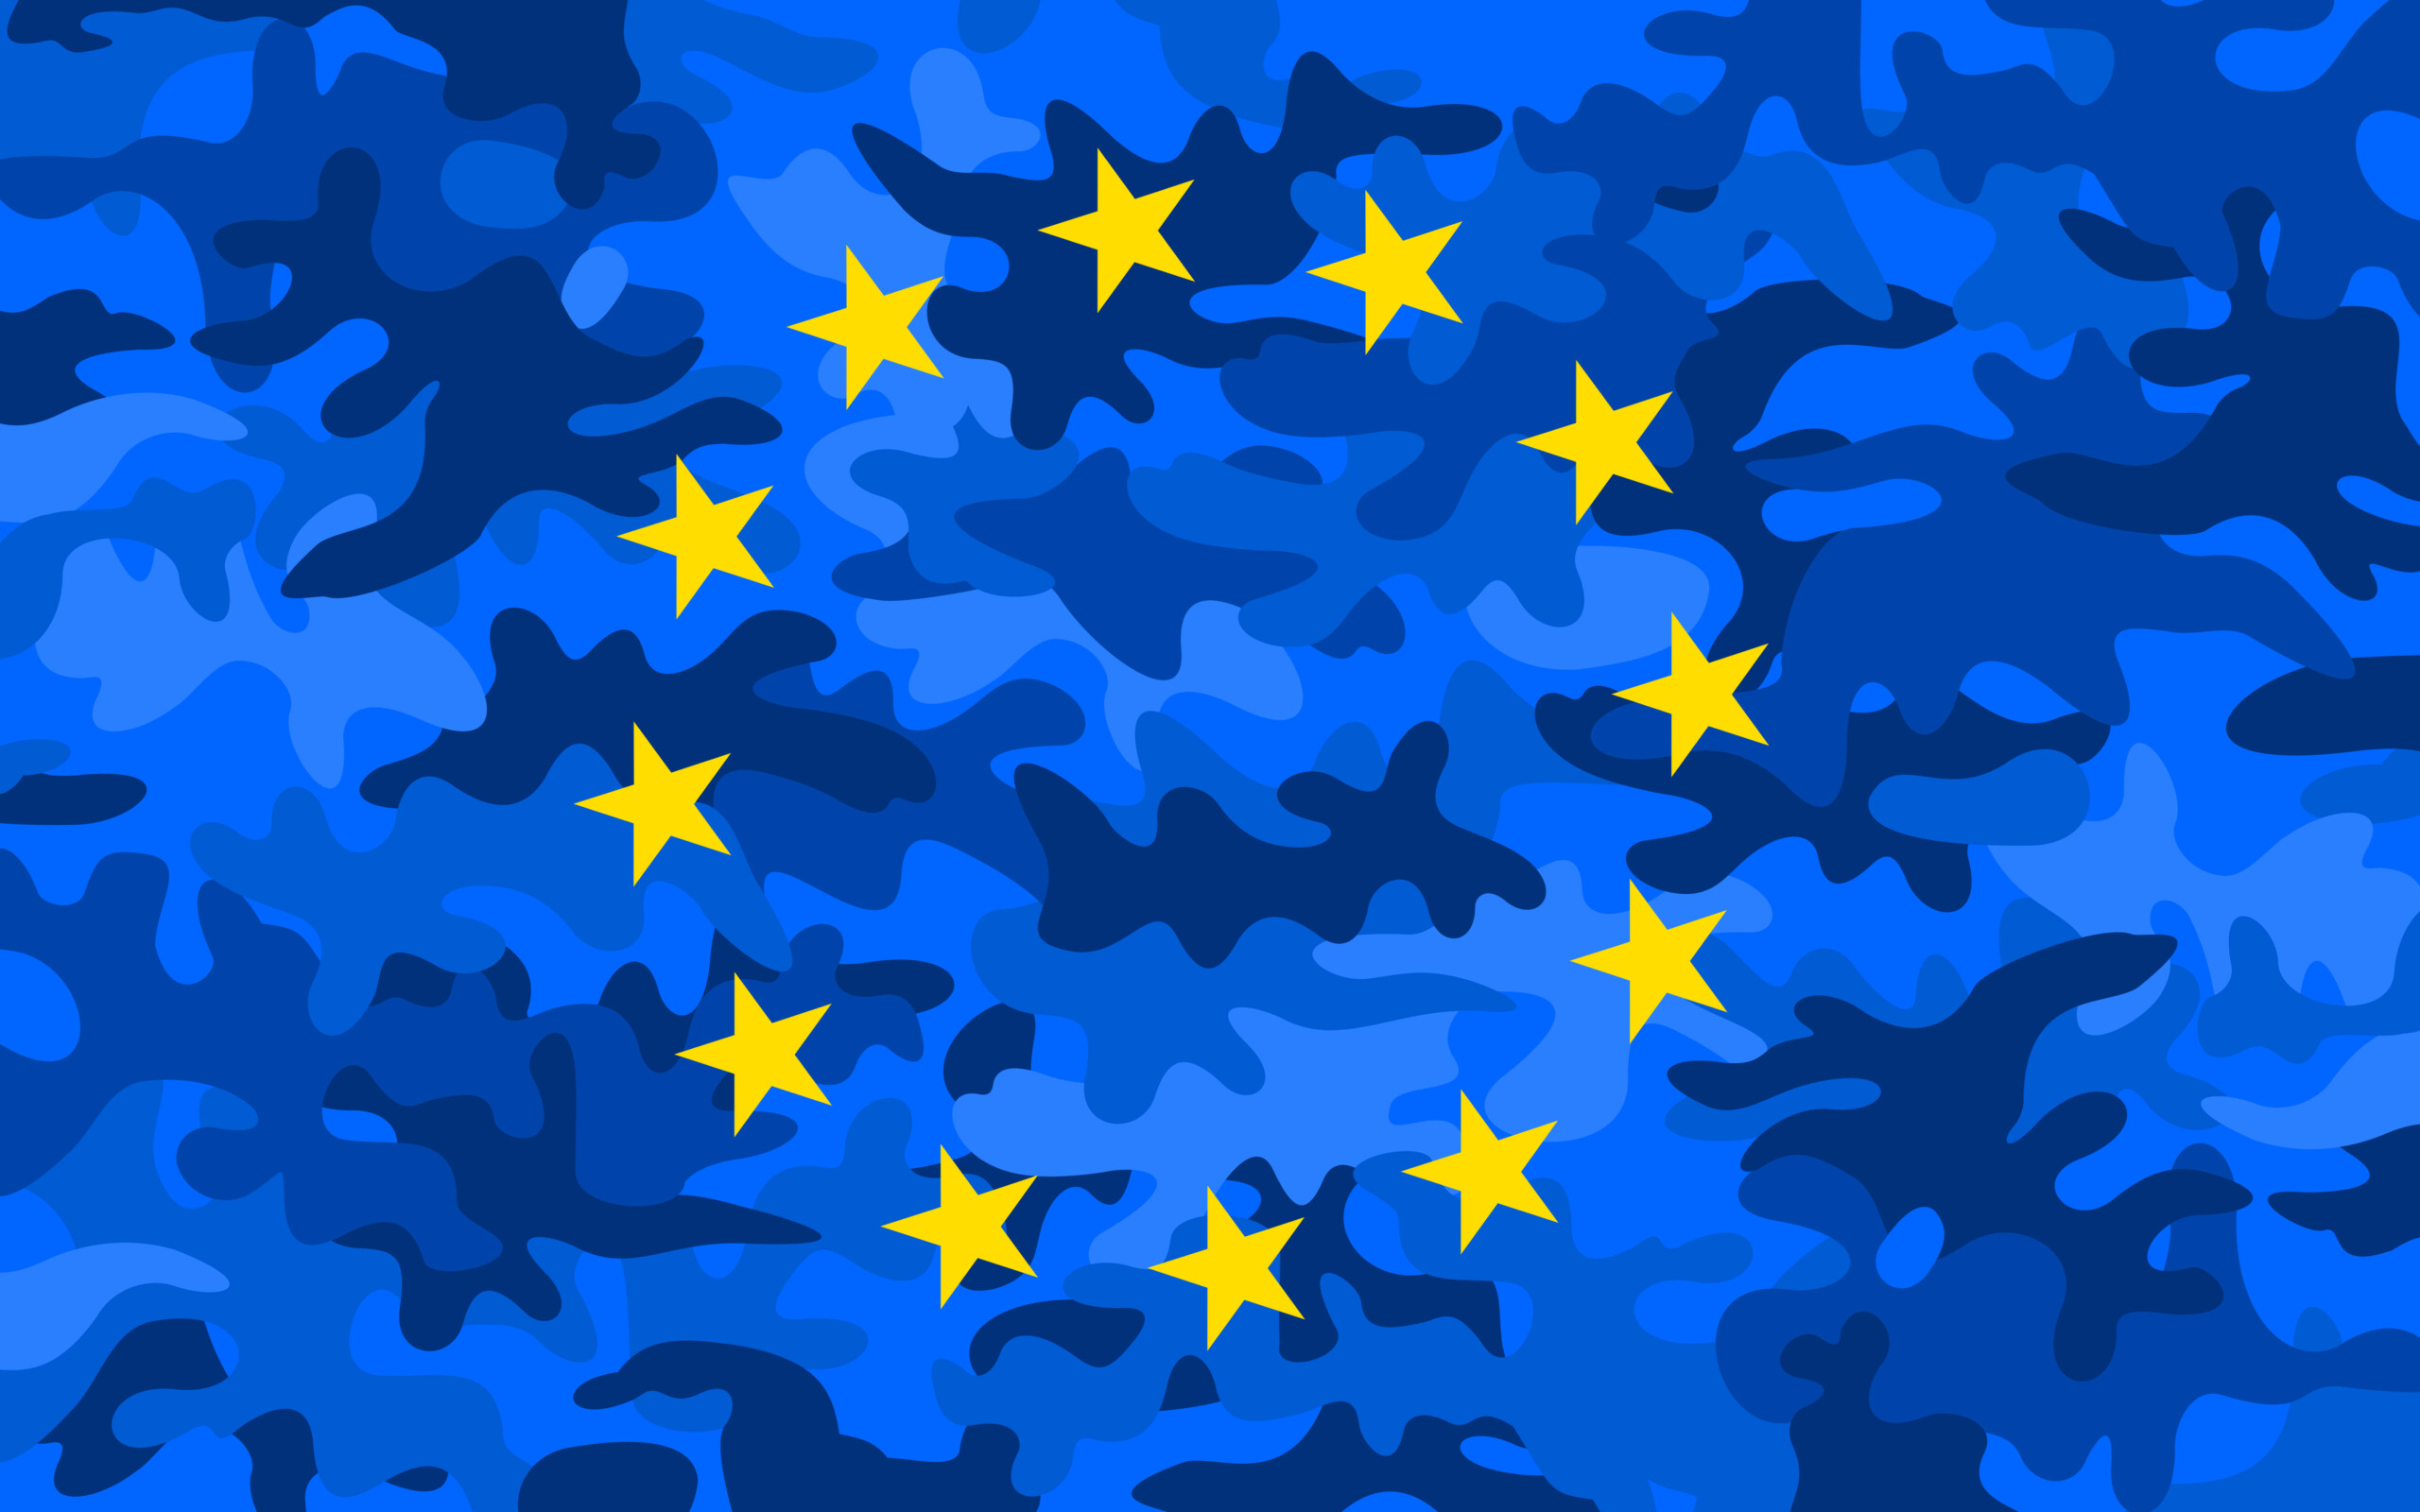 European Union Army – yellow stars and blue camouflage field as